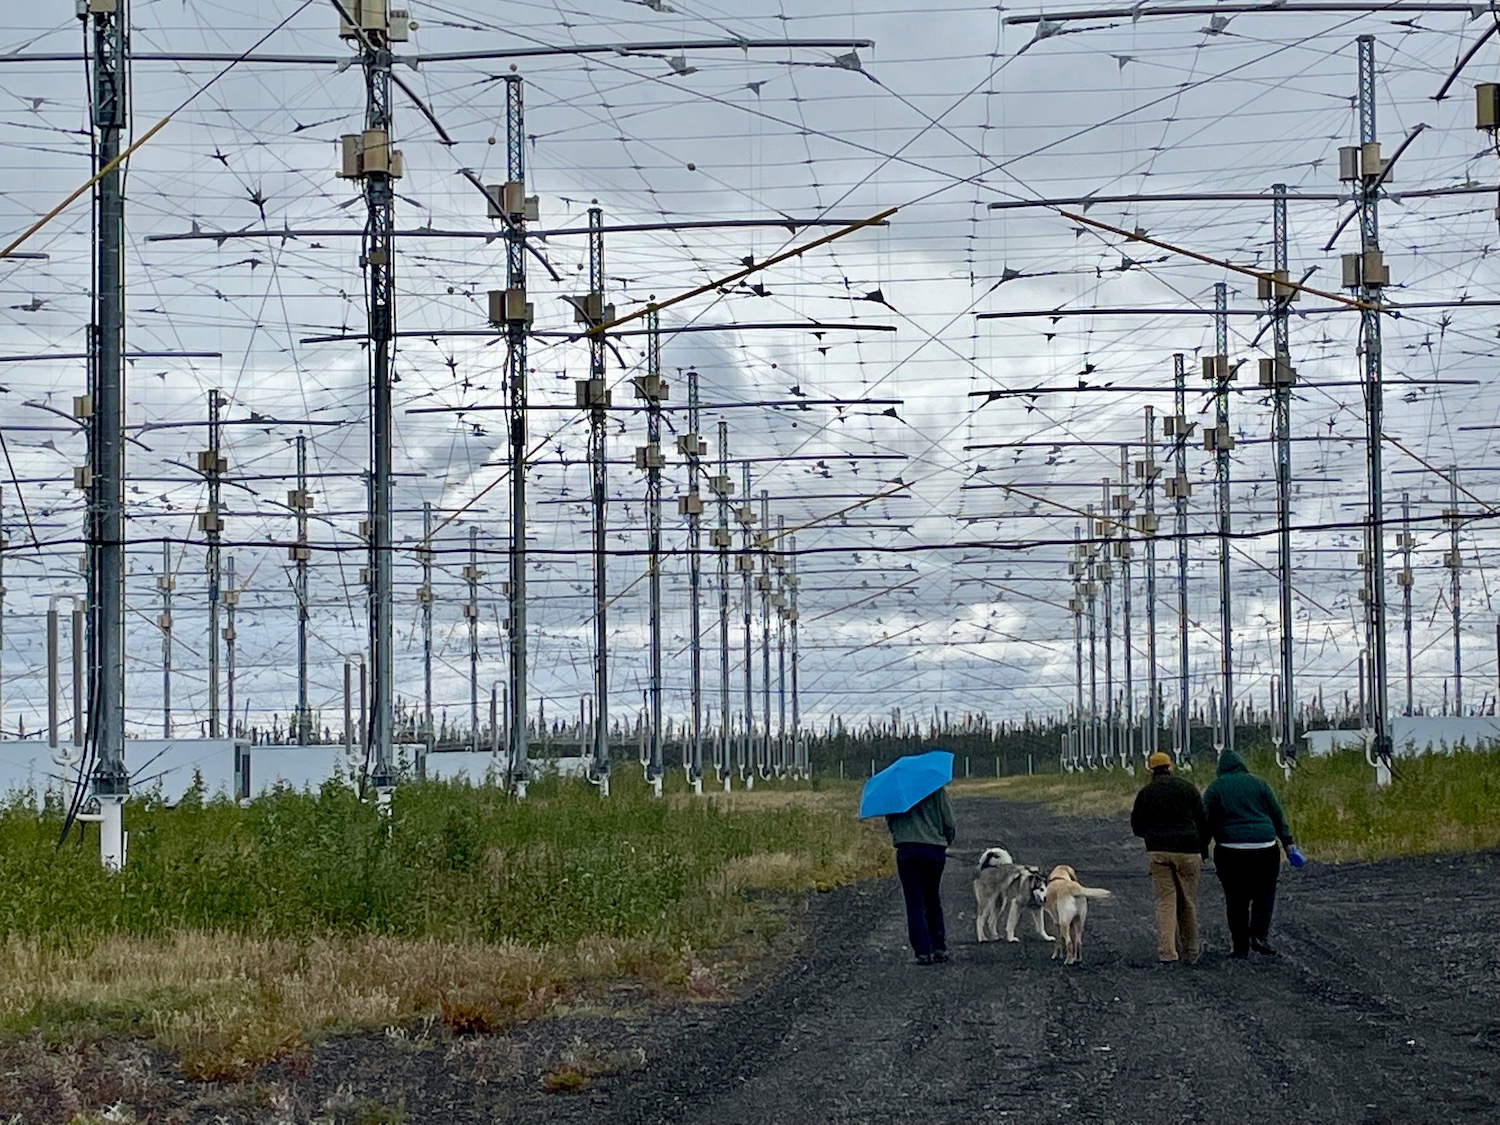 Several people walk with dogs on a gravel road between wire antennae suspended from metal poles.